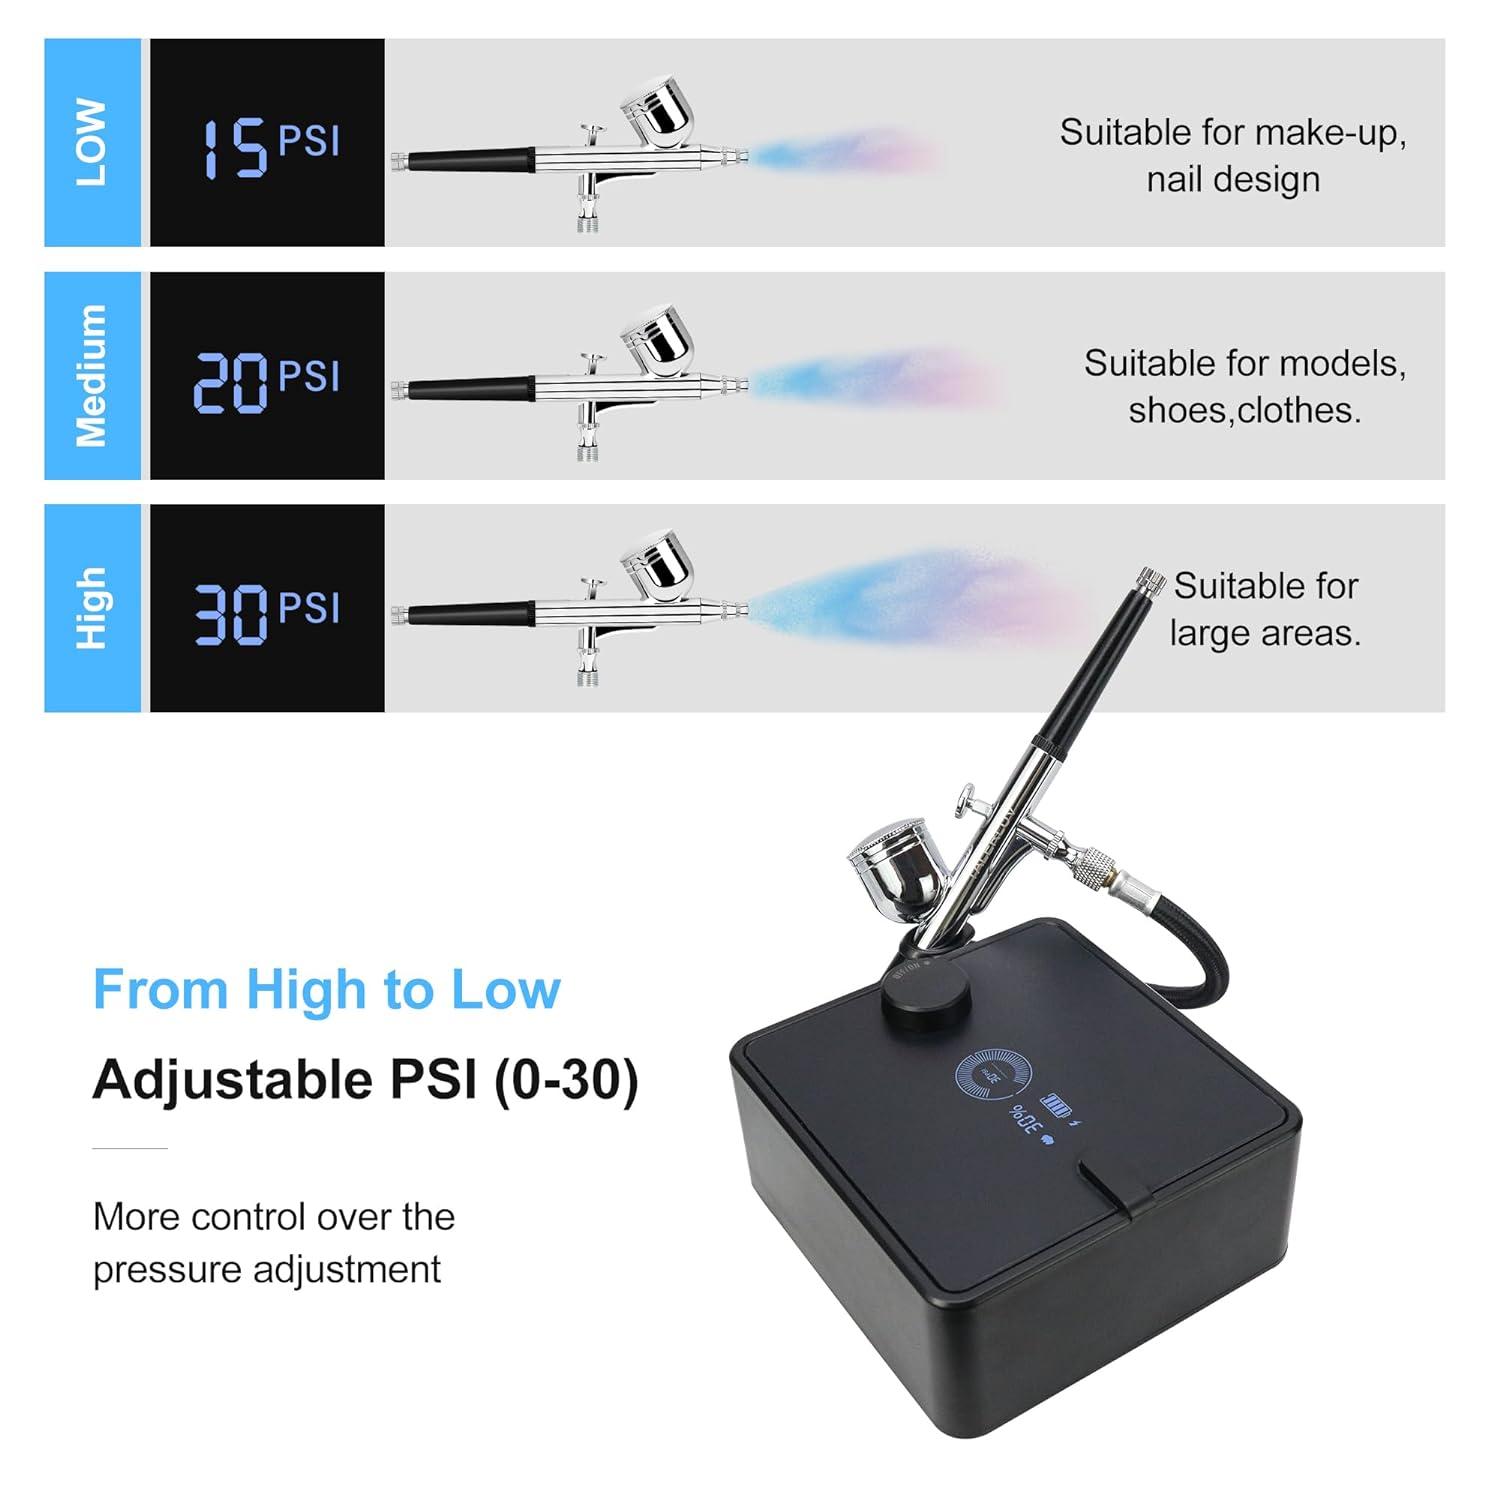 Rechargeable Airbrush Kit w/Compressor, Battery Indicator, Humidity Sensor & PSI Display - Dual-Action, Adjustable PSI, Cleaning Kit incl. for Makeup Painting Cake Nail Barber Modeling Coloring